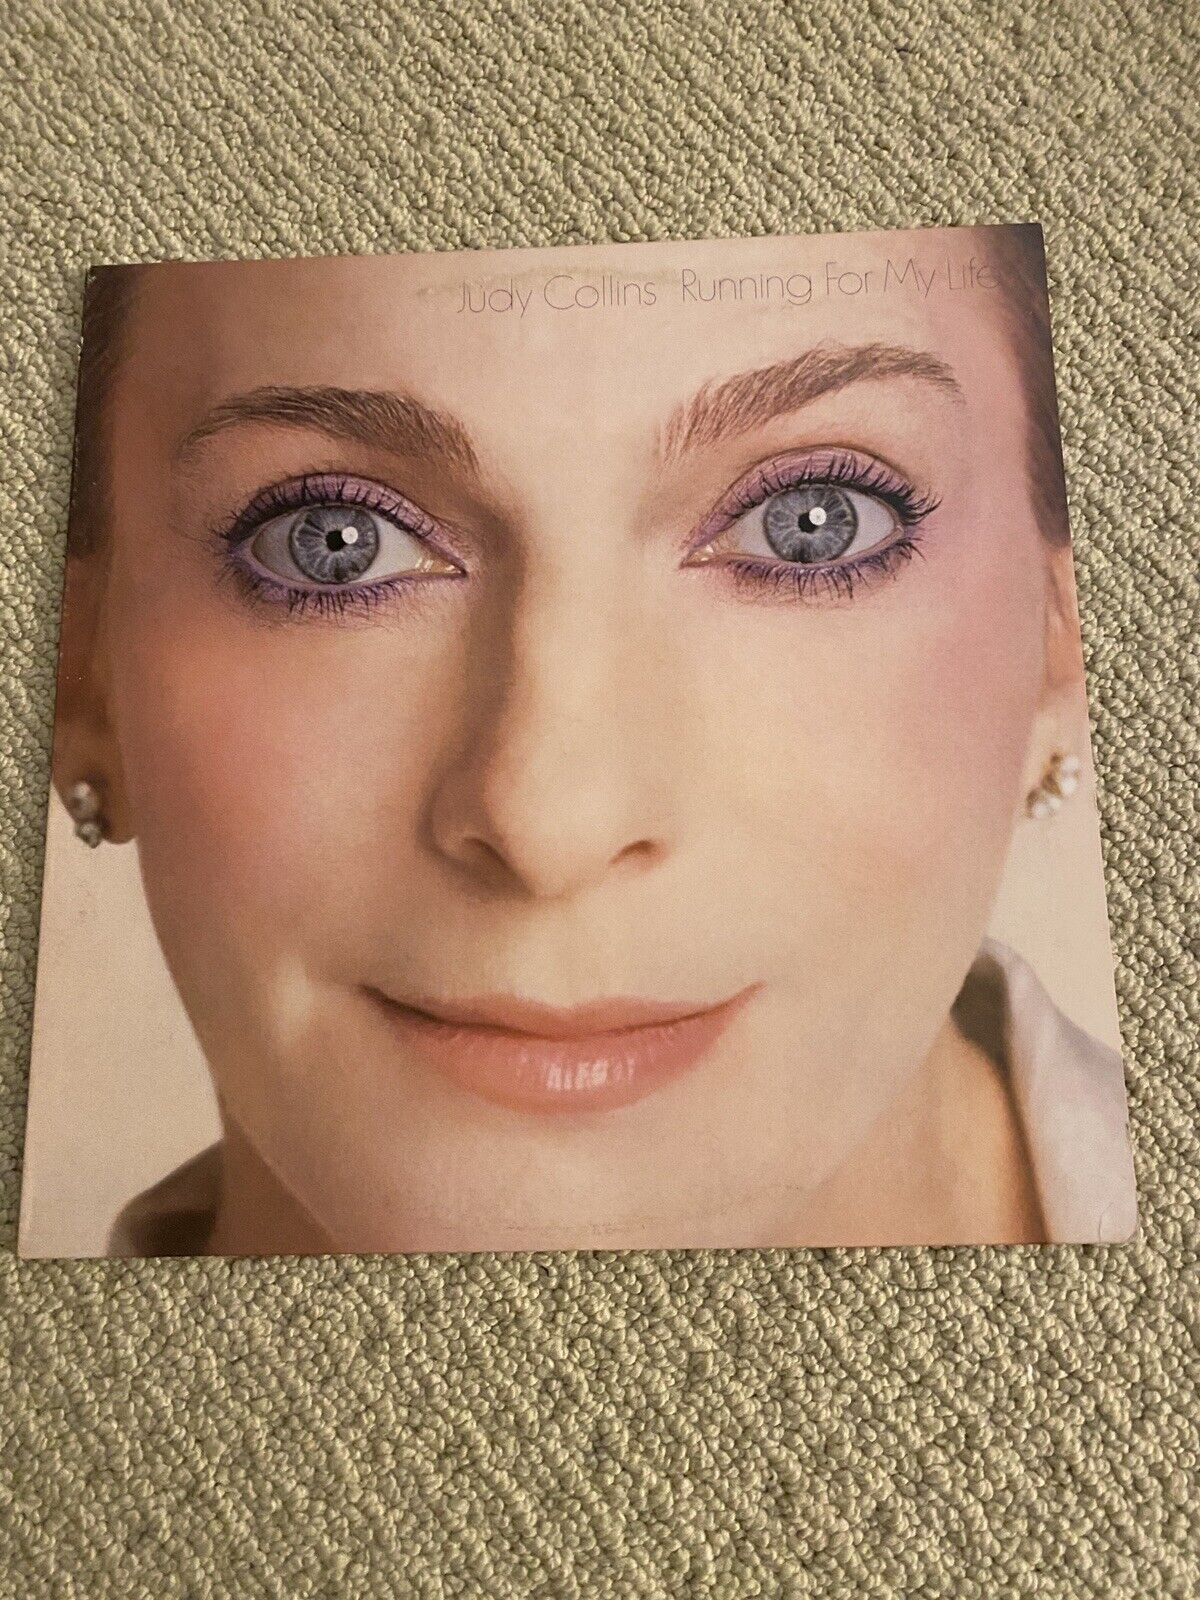 Judy Collins - Running For My Life Vinyl Record - VG+ Condition Rare